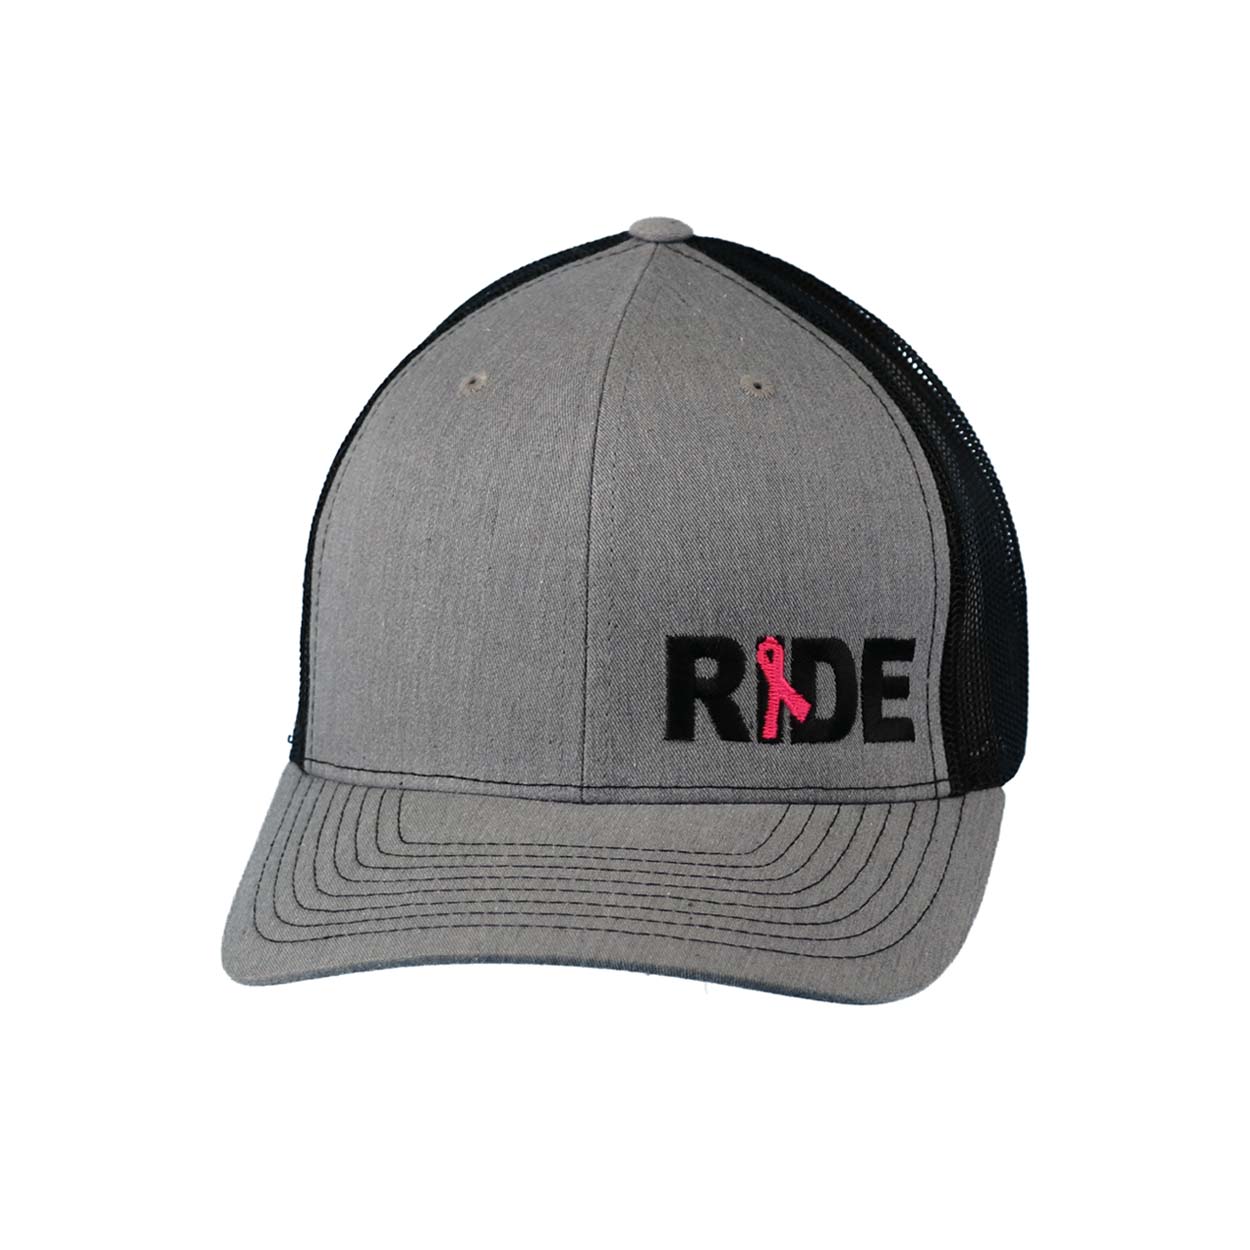 Ride Ribbon Logo Night Out Pro Embroidered Snapback Trucker Hat Heather Gray/Black